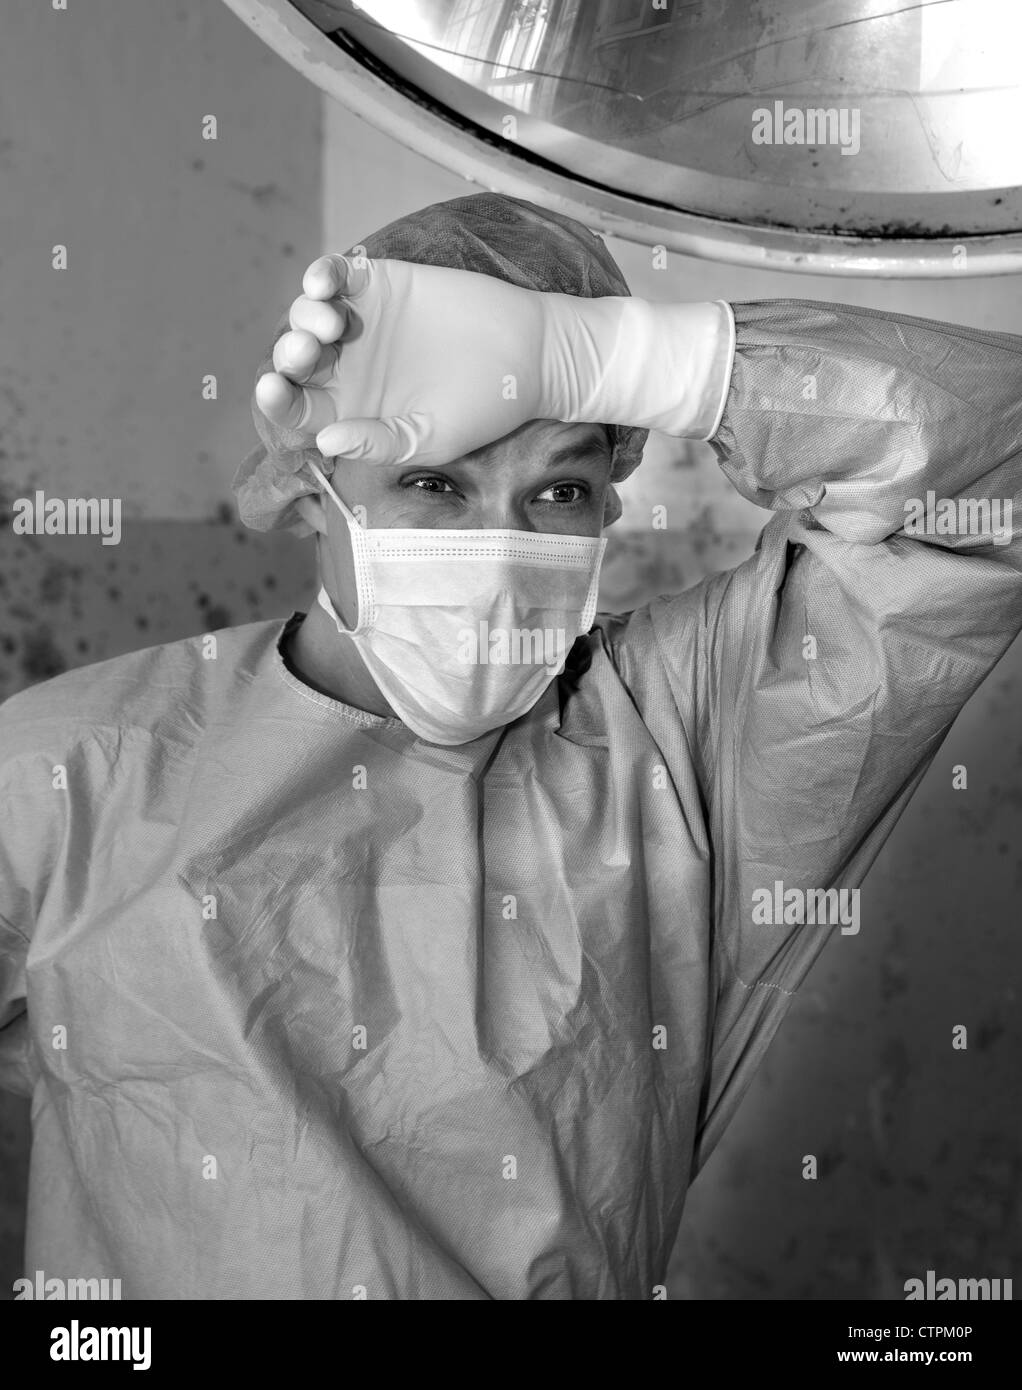 Shaded surgeon is tired and happy saving live Stock Photo